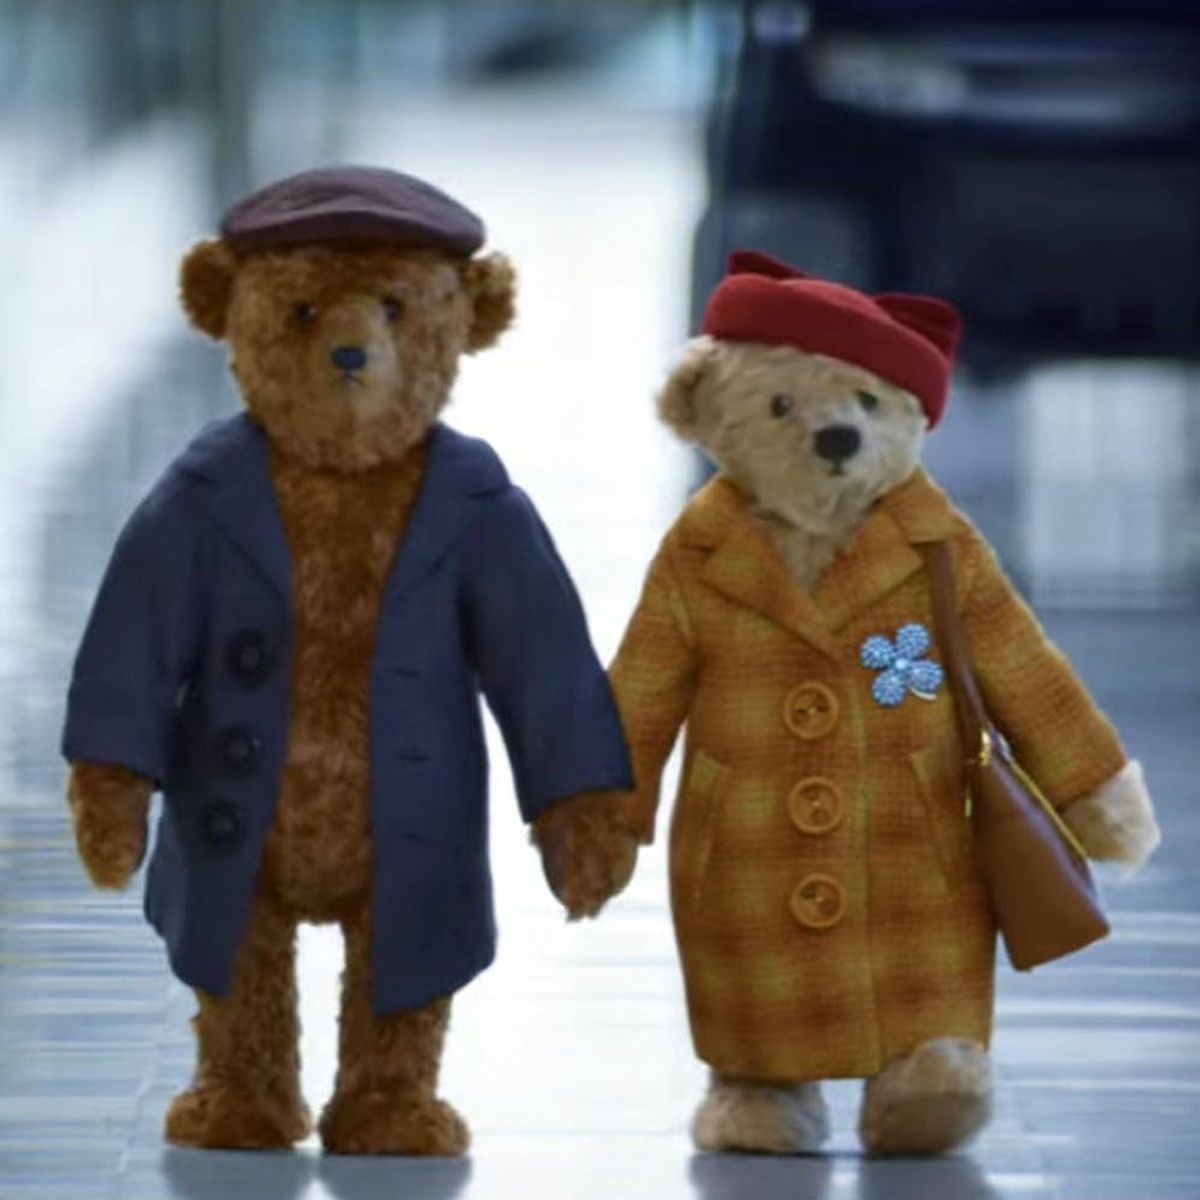 This Elderly Teddy Bear Holiday Commercial Is the Sweetest Thing EVER